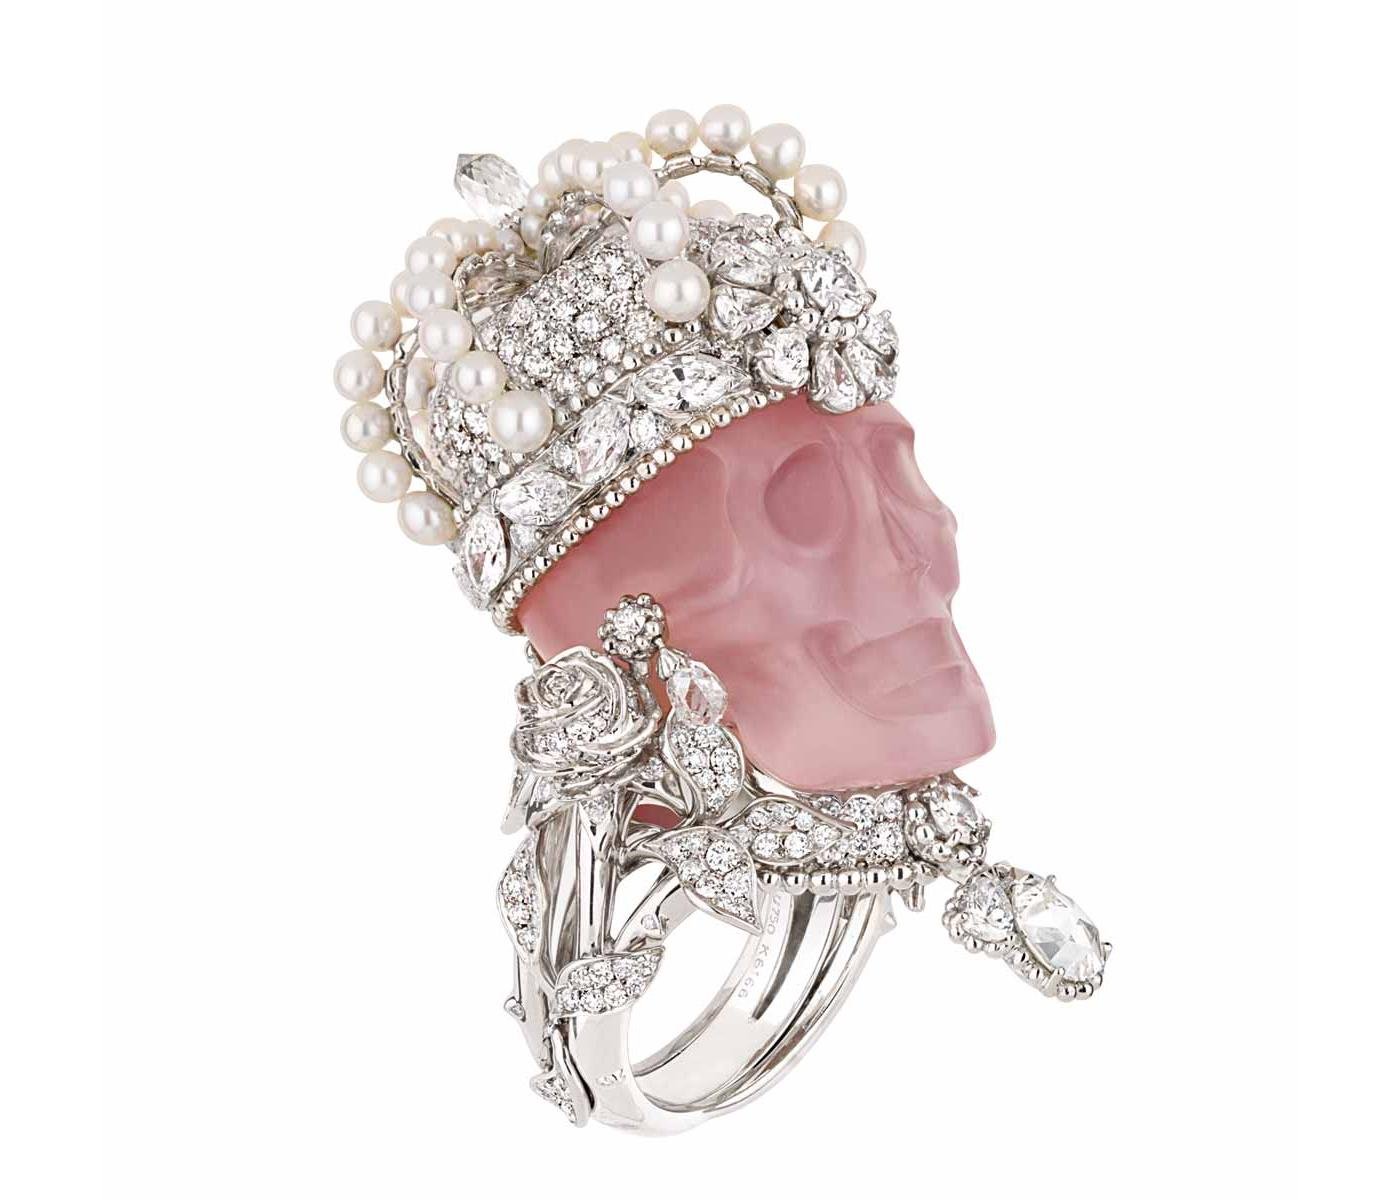 Ring by Dior